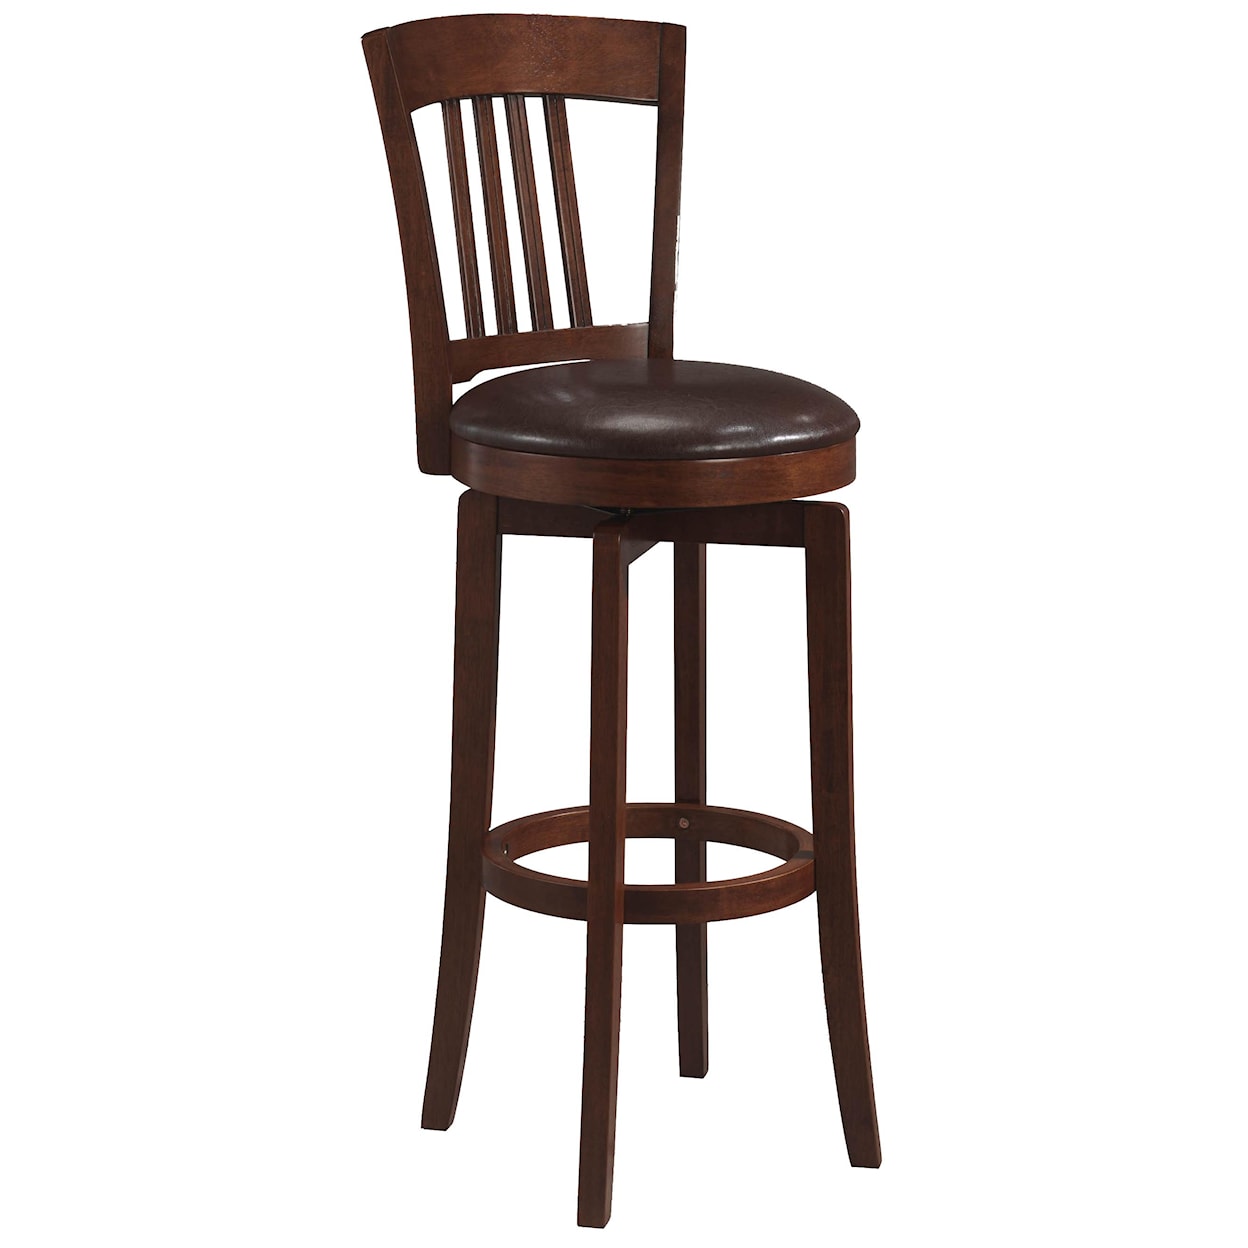 Hillsdale Wood Stools 24.5" Counter Height Canton Swivel Stool